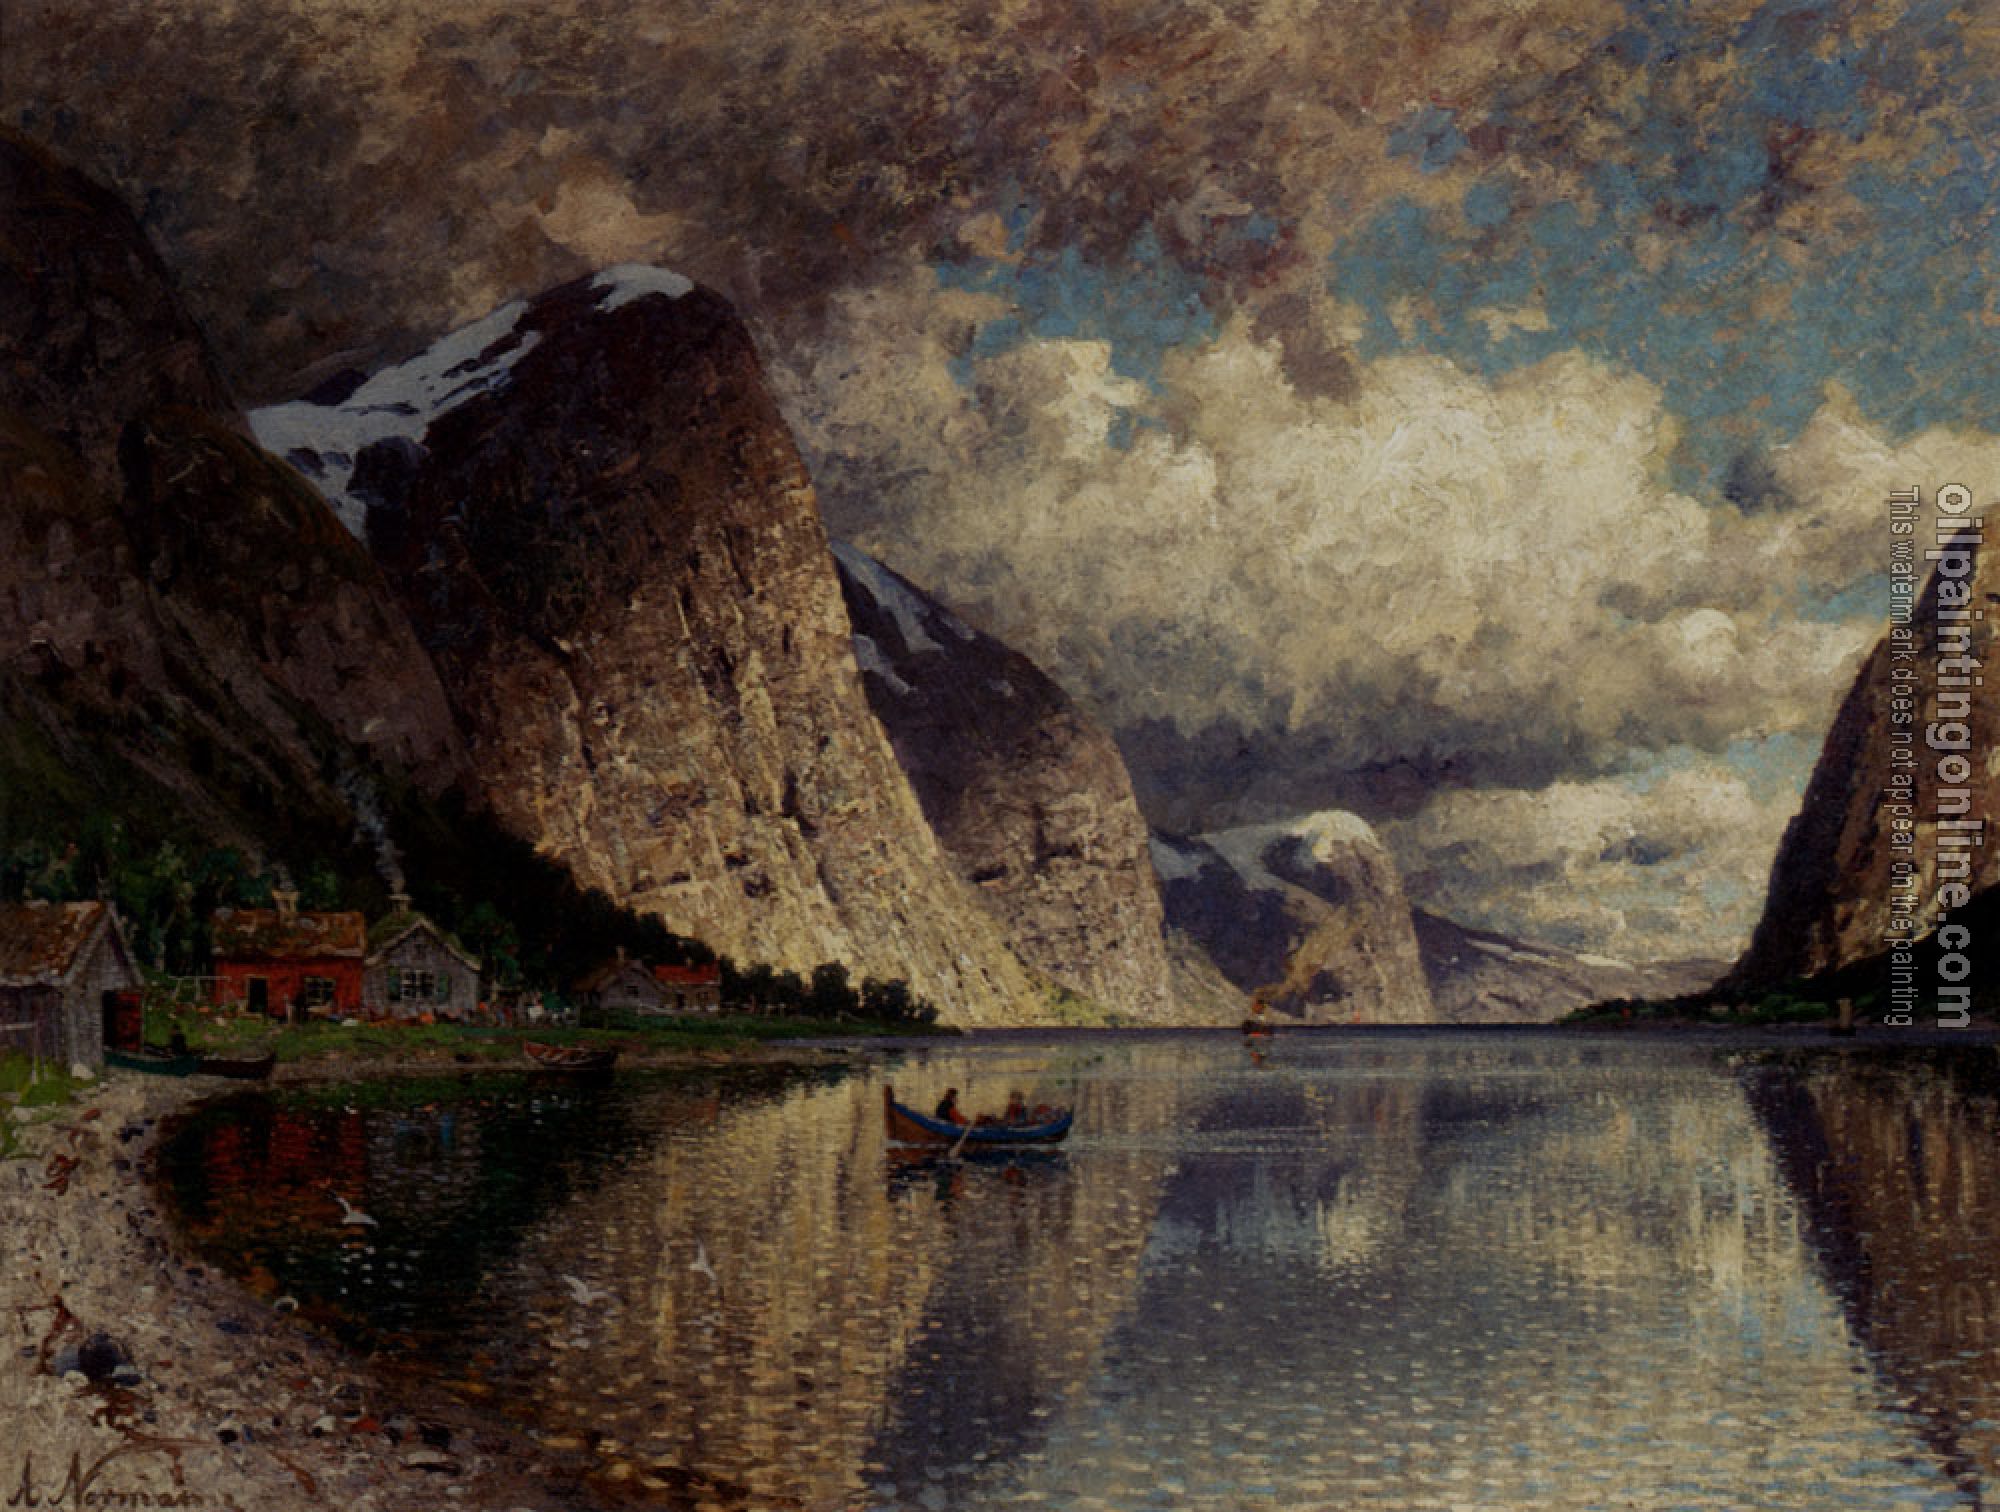 Adelsteen Normann - A Clody Day On A Fjord